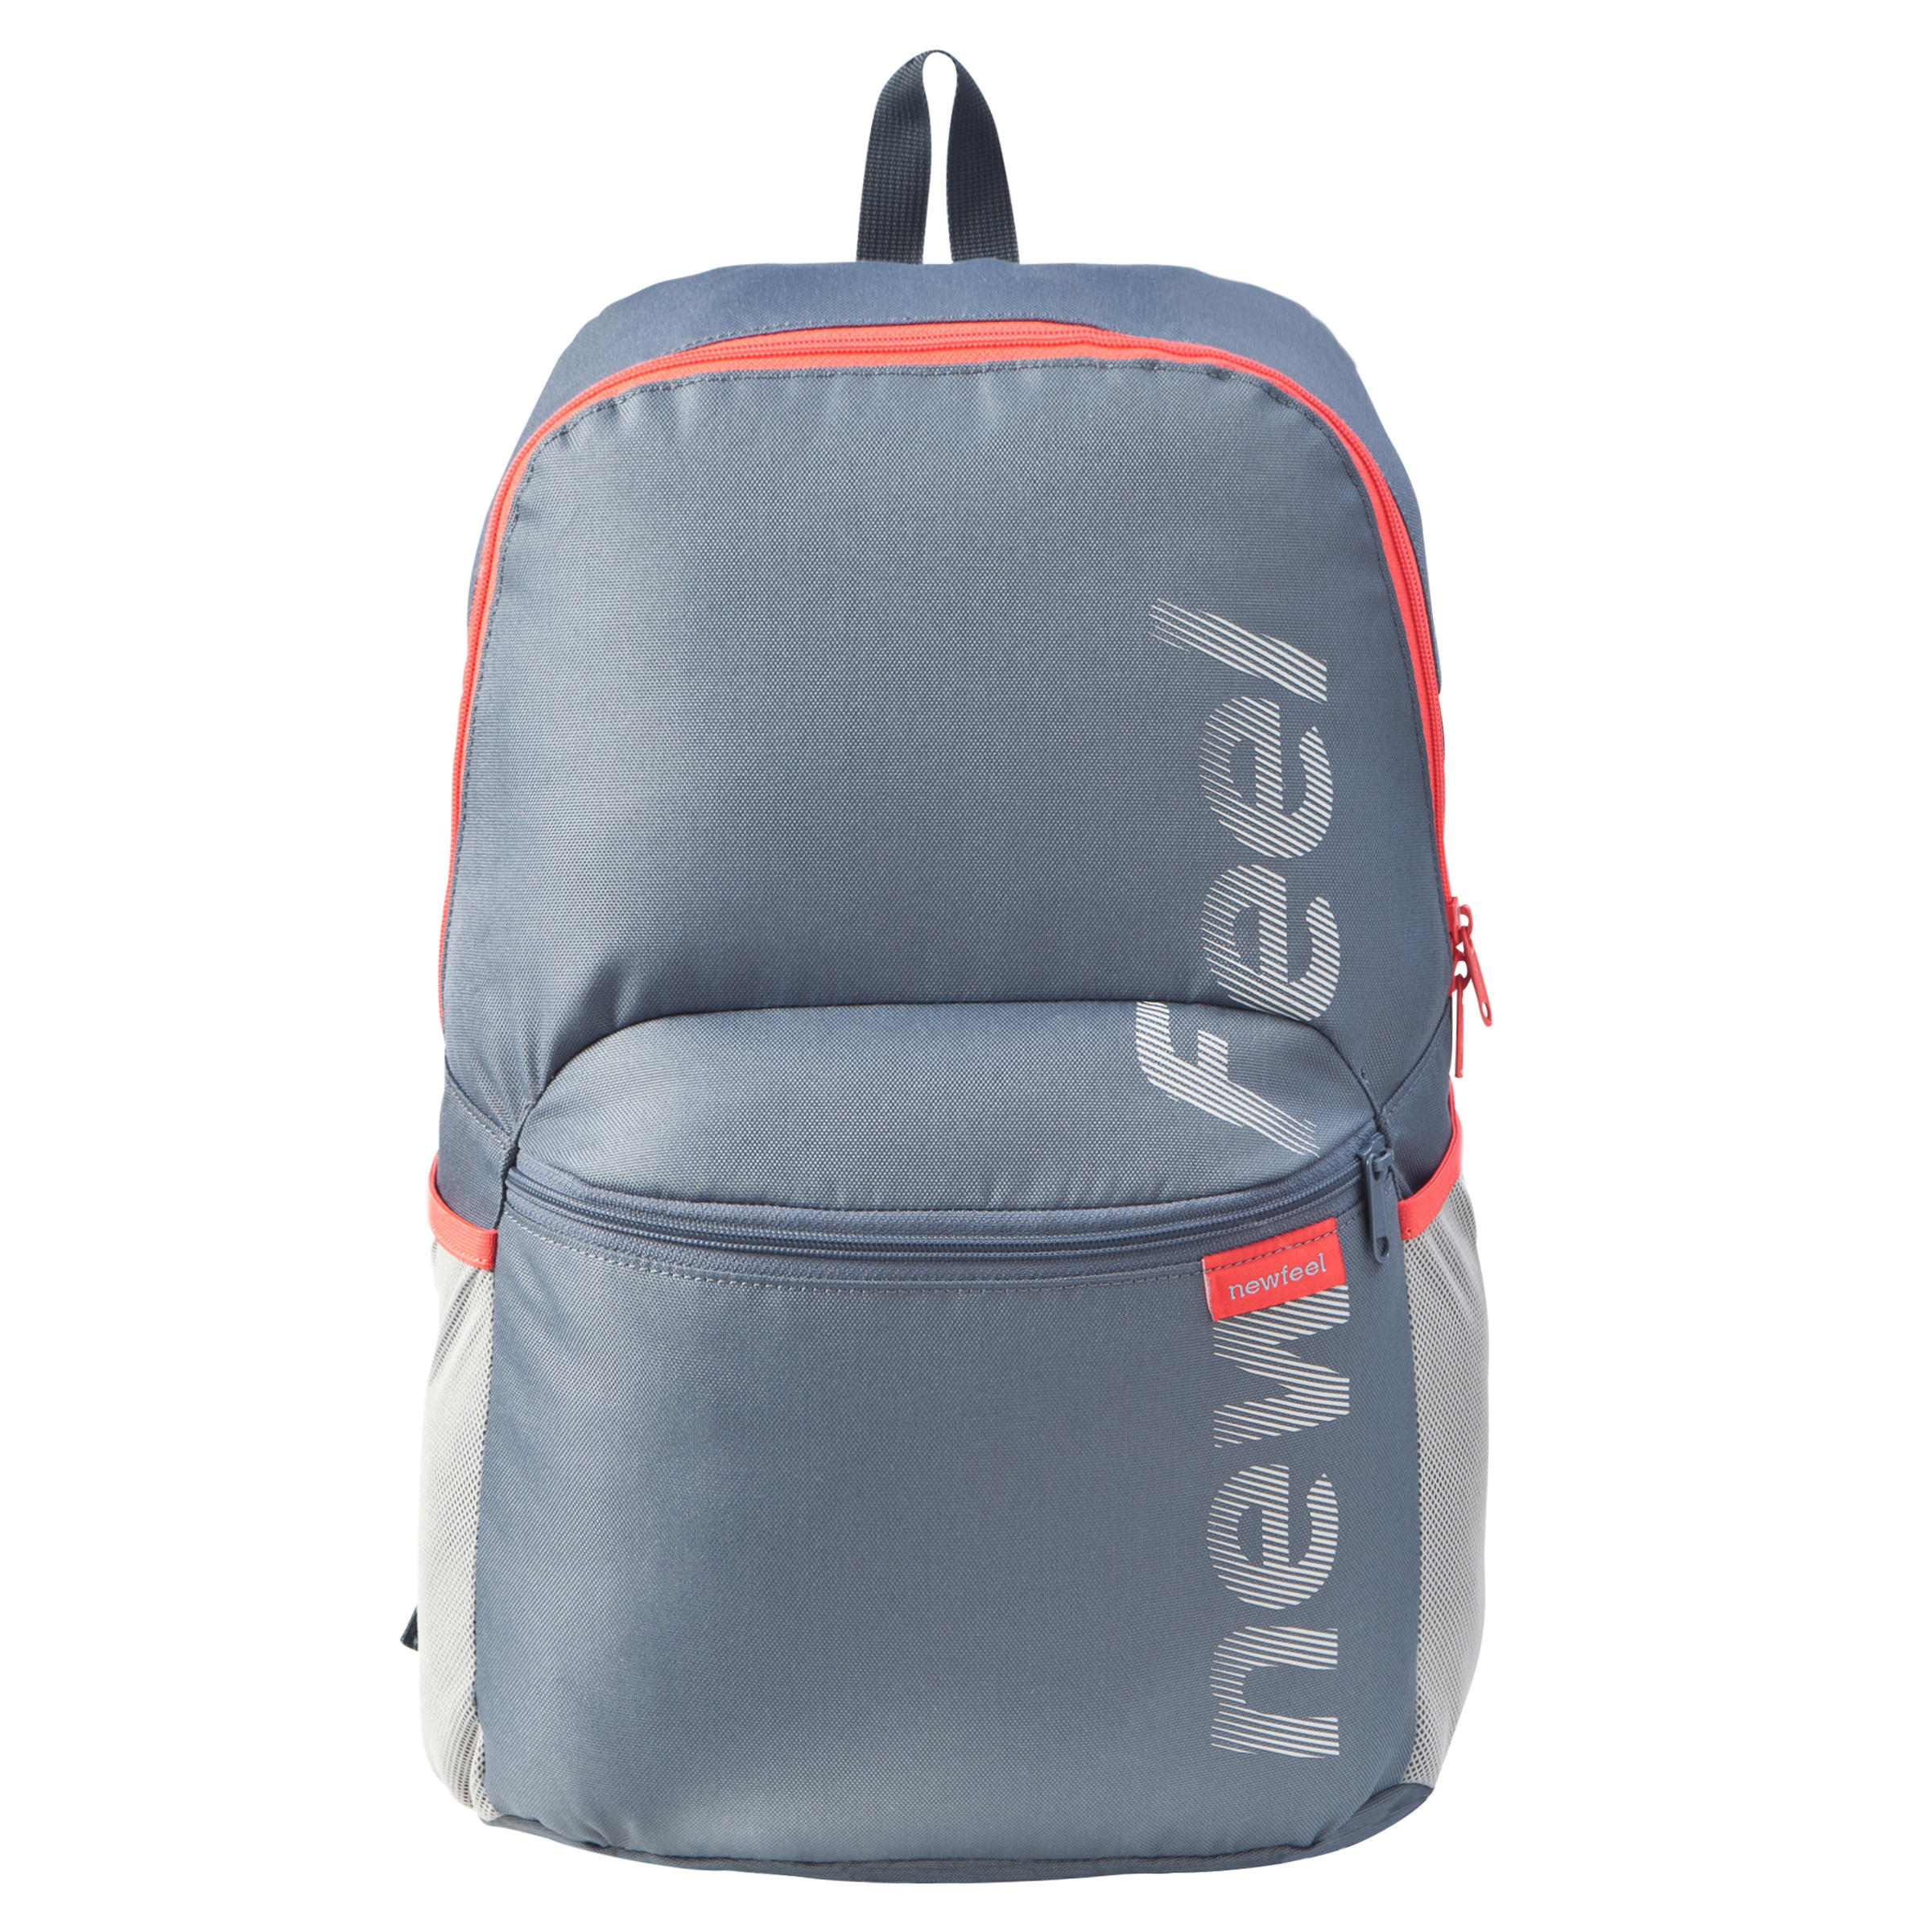 Abeona 140 20l backpack - grey/pink 2/10